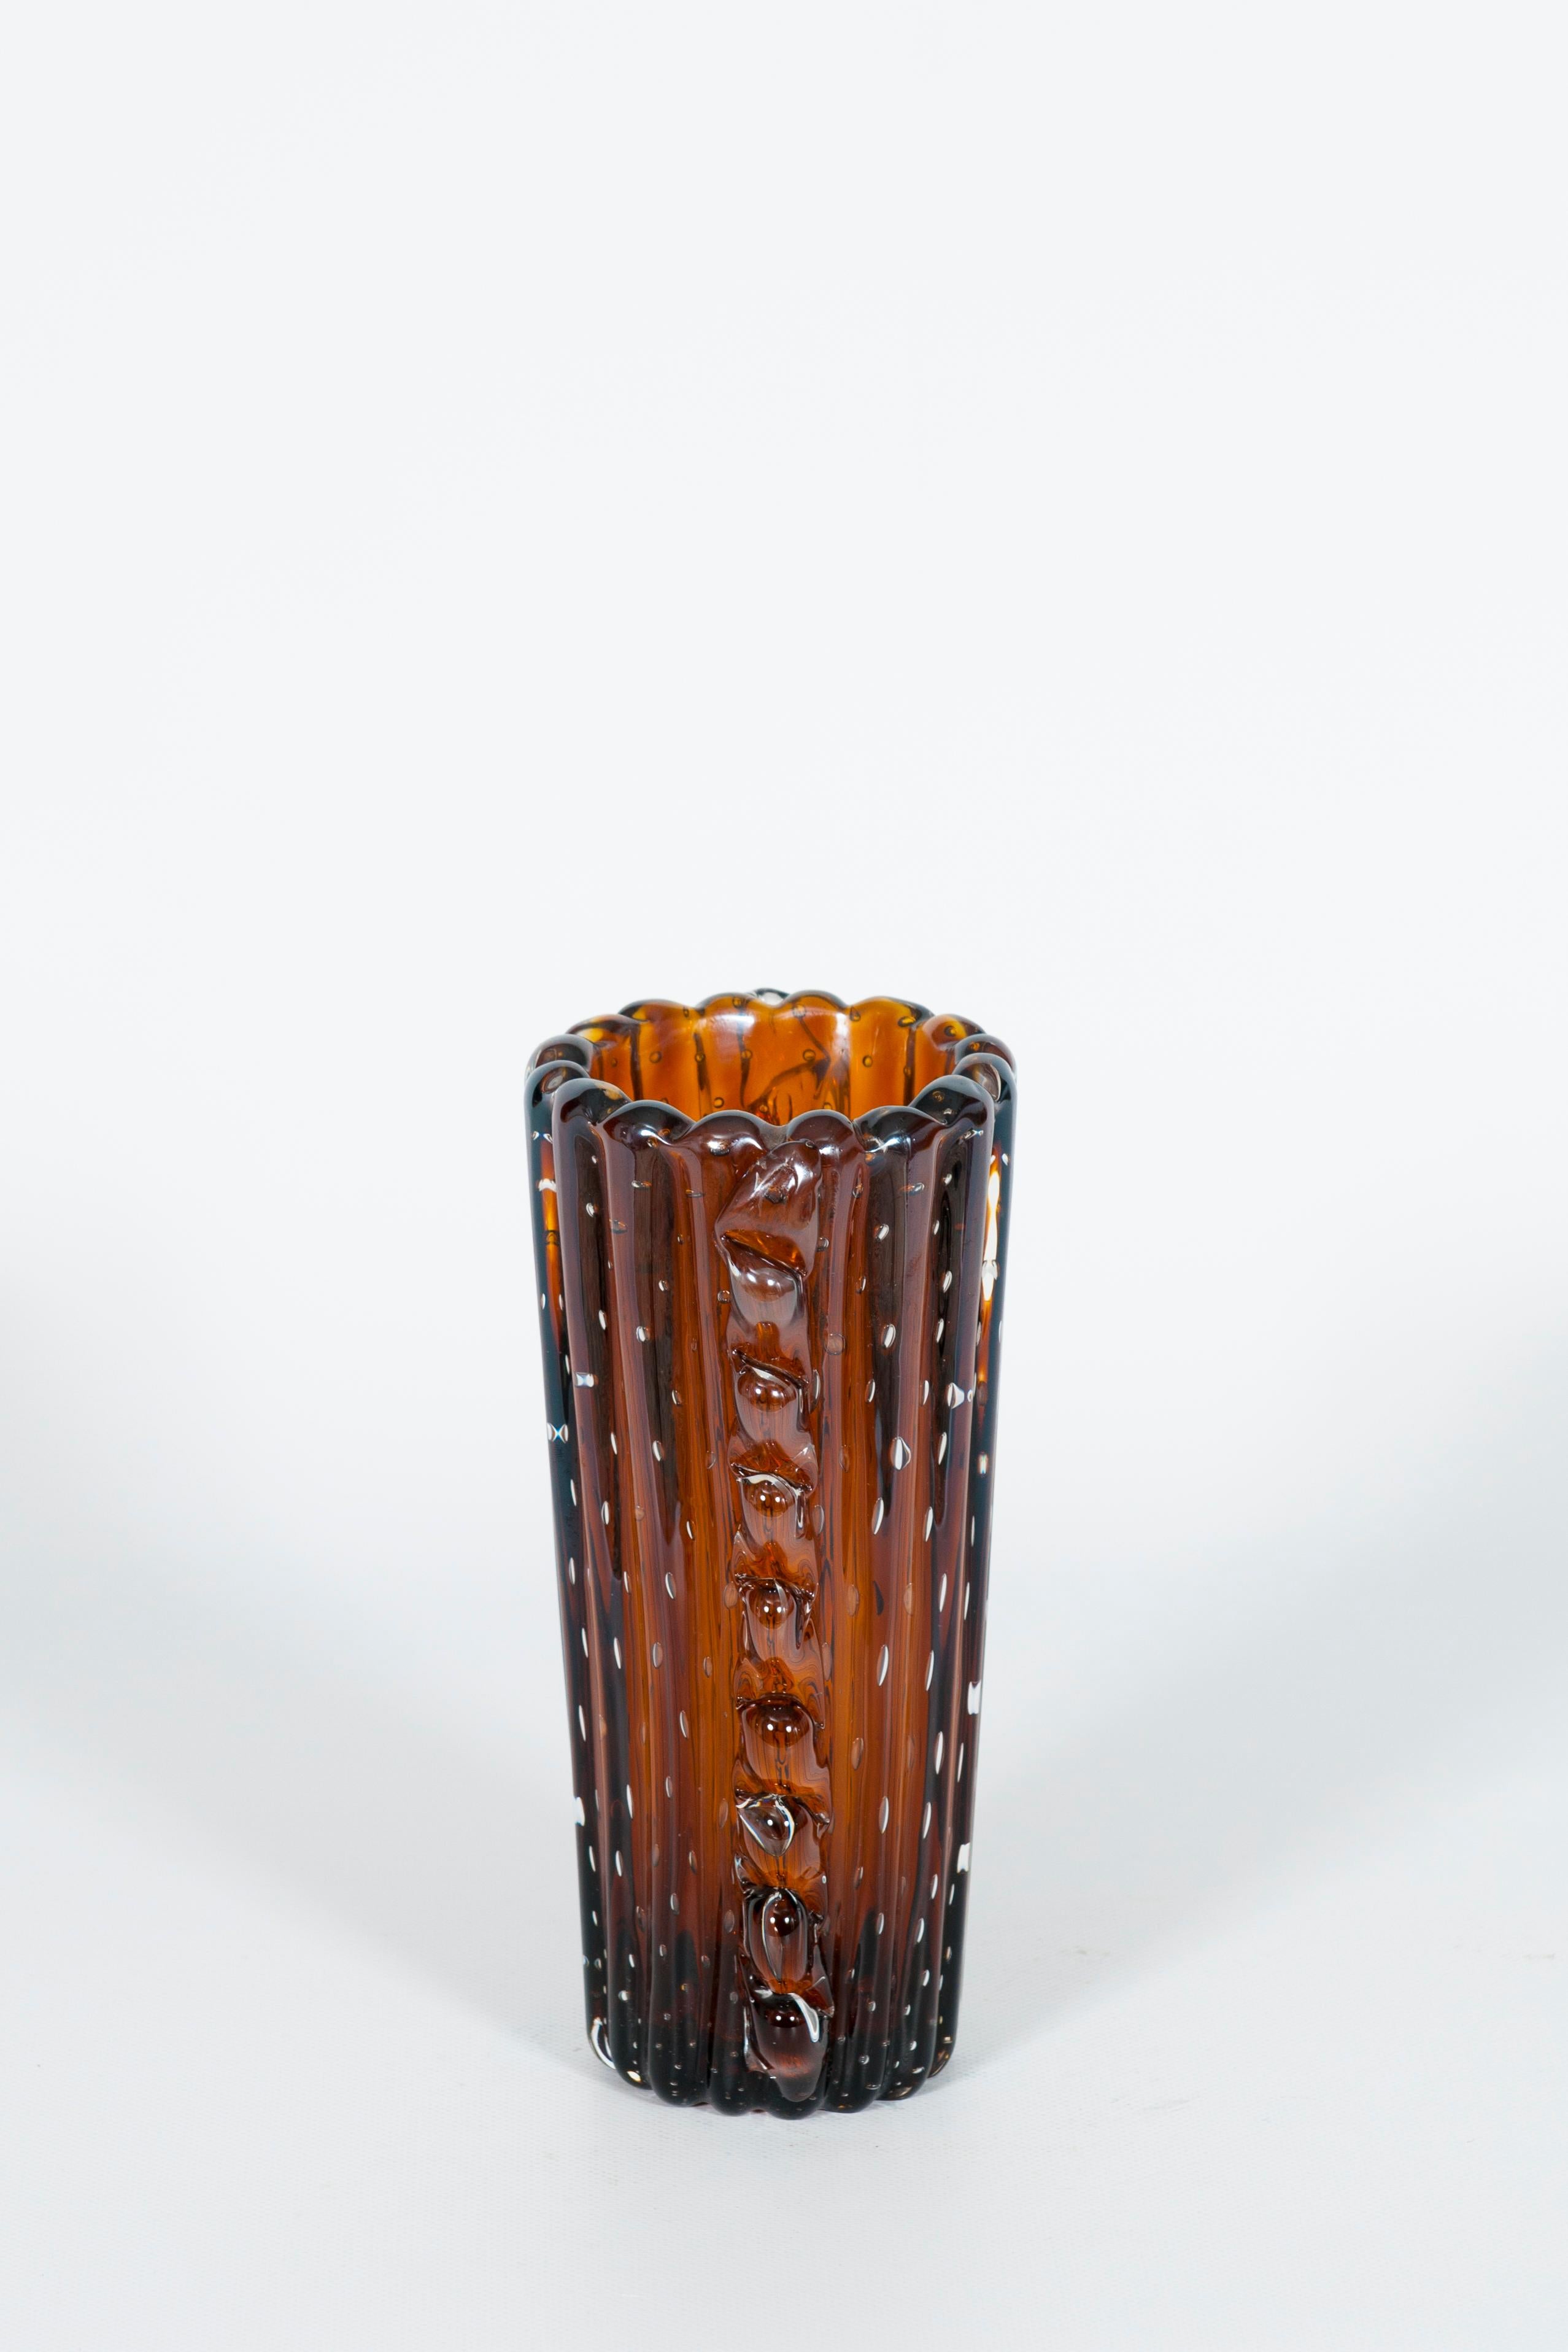 Blown Glass Dark Amber Color Murano Glass Bubble Vase Attributed to Seguso 1980s Italy For Sale